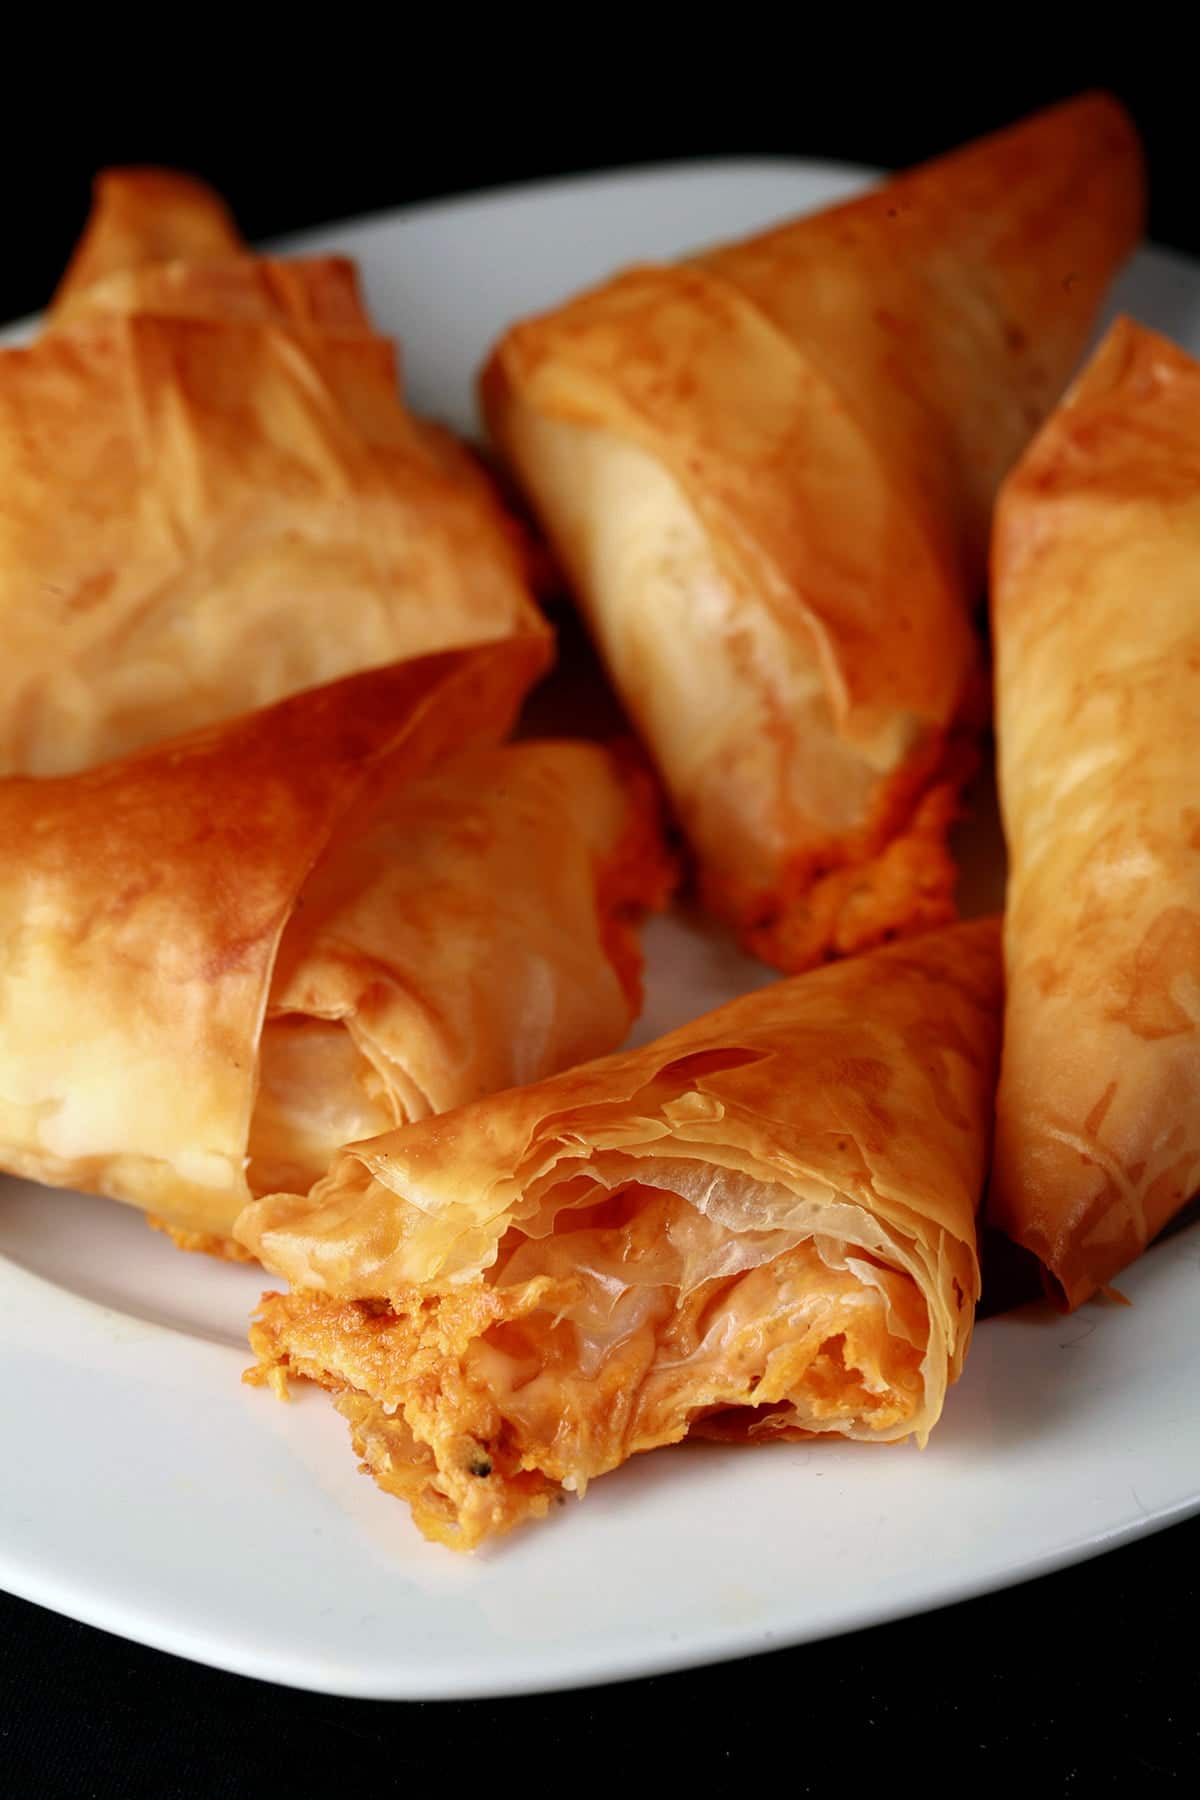 A close up view of a triangular pastry made from folded phyllo dough. They are flaky and crispy, with a red filling showing from one that has been bitten into.